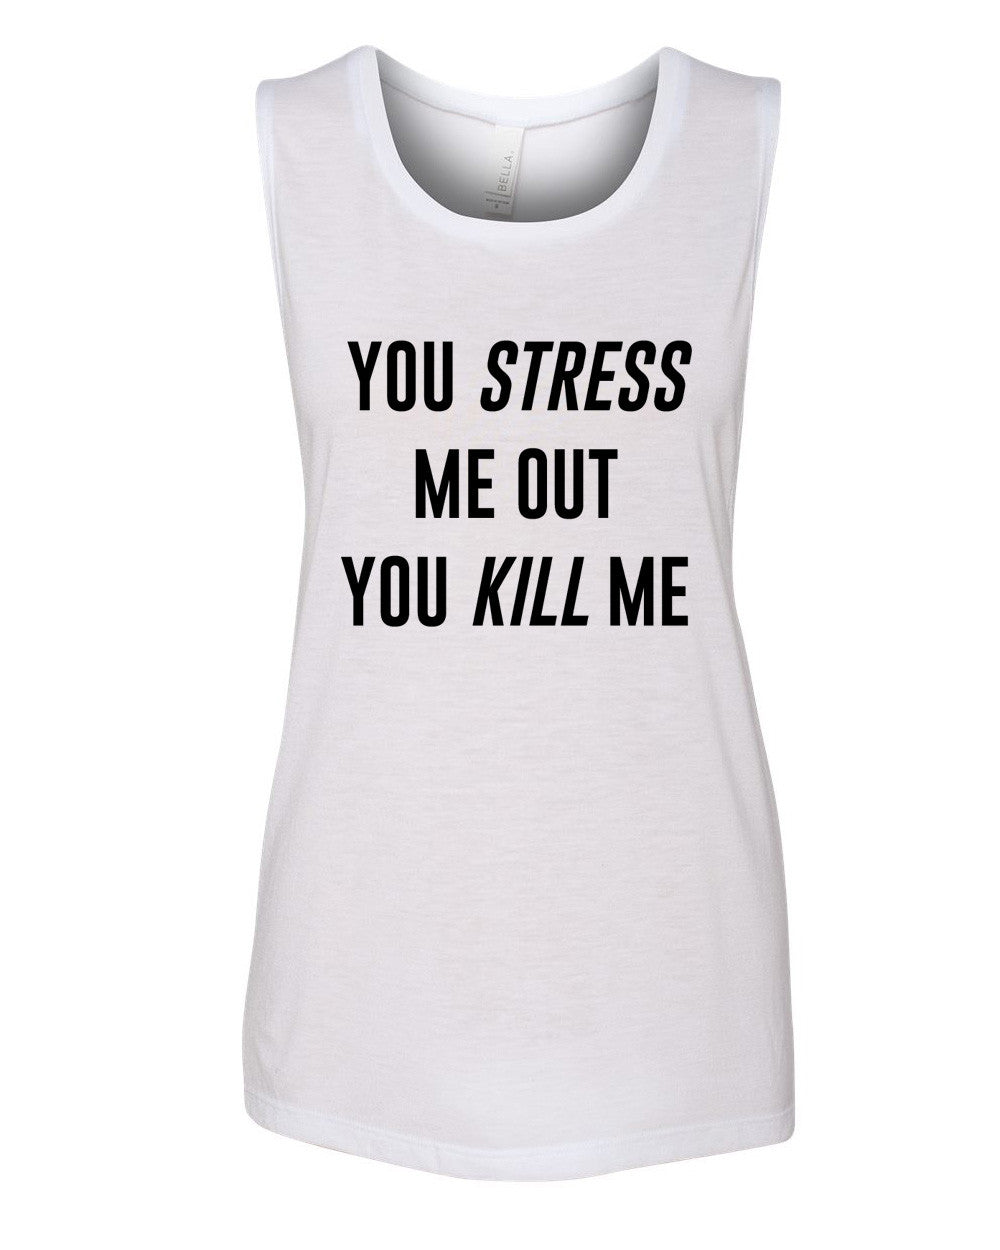 Louis Tomlinson / Bebe Rexha “Back to You – You Stress Me Out You Kill Me” Muscle Tee – Top Best ...